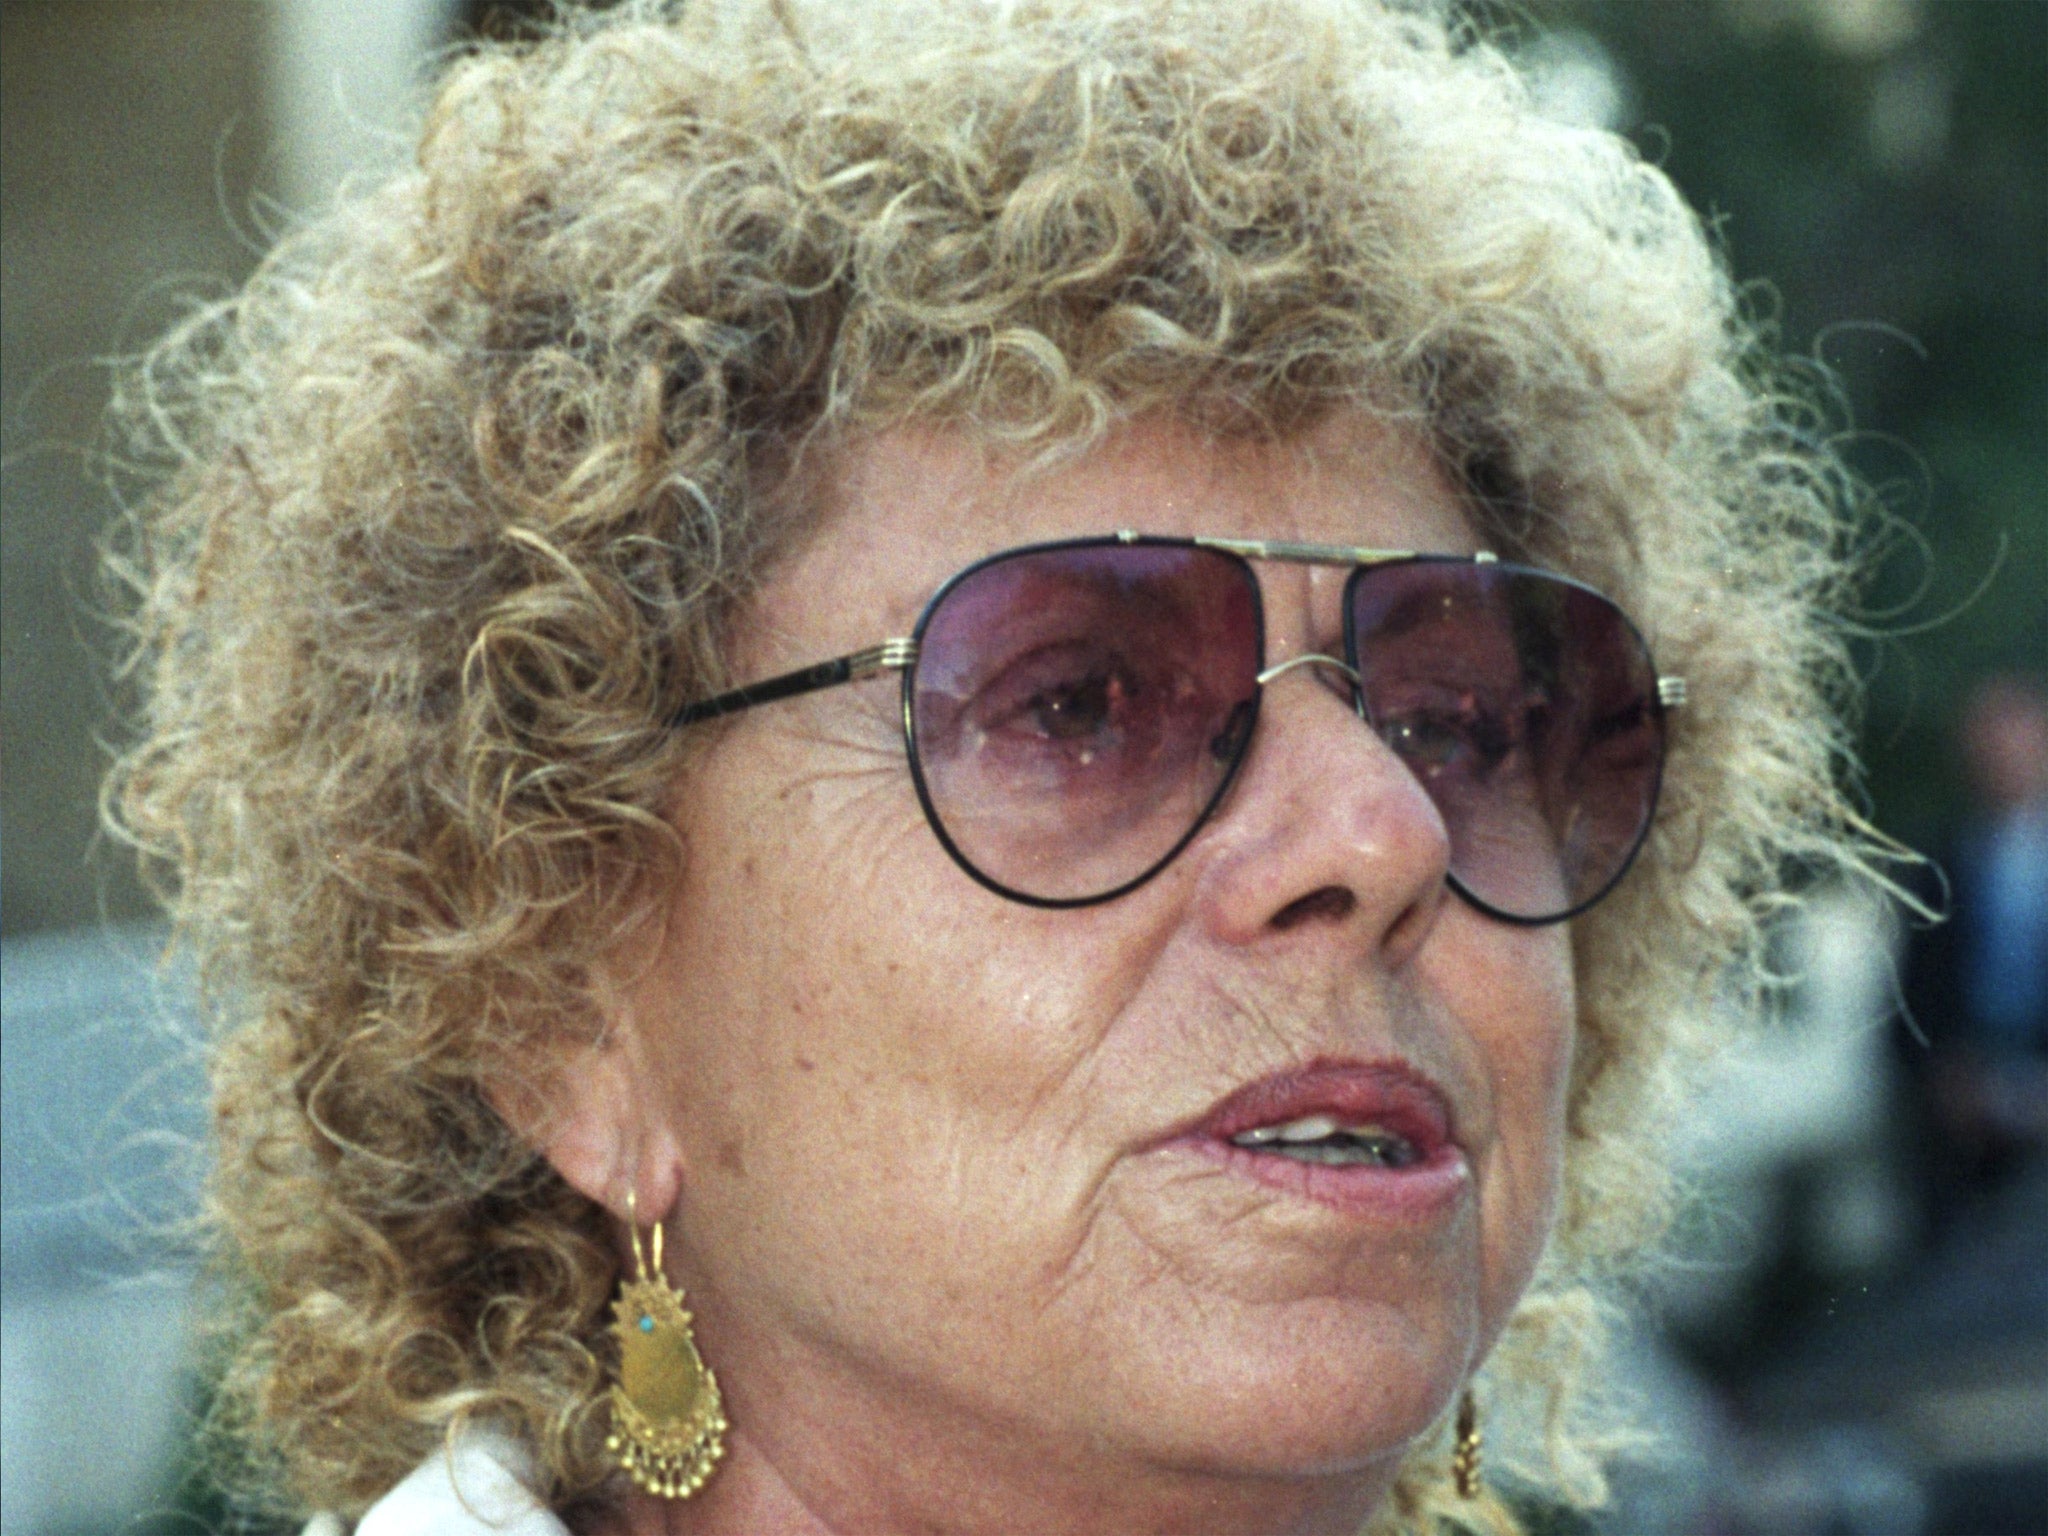 Aloni in 1992, the year she formed the Meretz Party